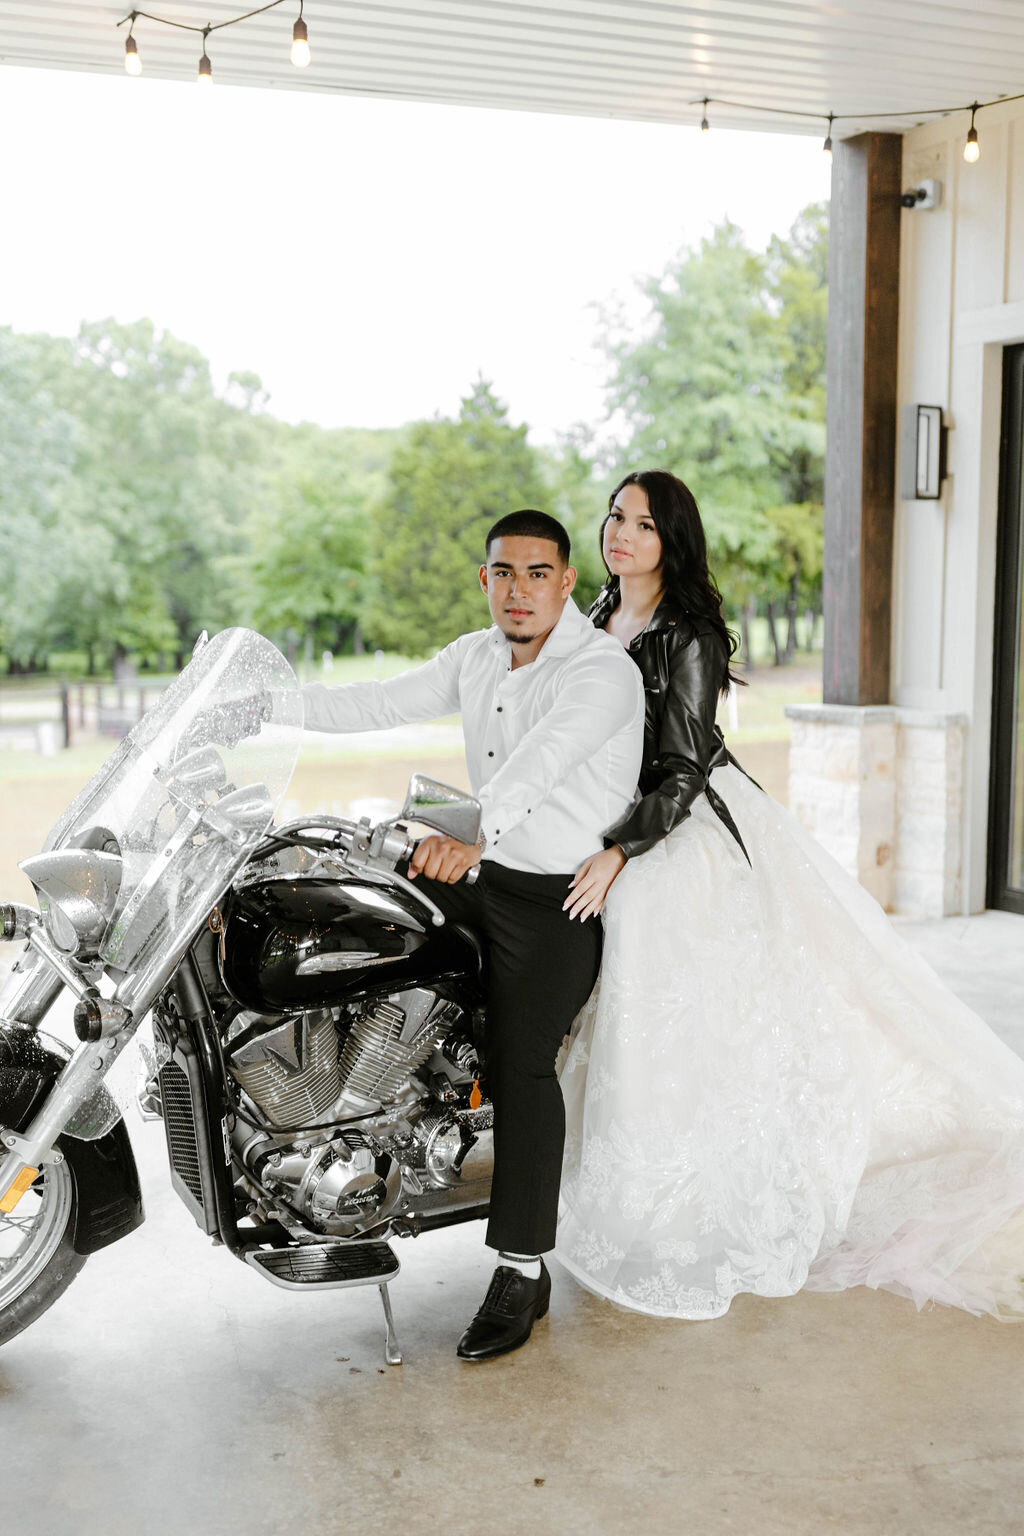  Tara LaTour Delta wedding gown for an edgy motorcycle styled bridal shoot at Margot Hill in Texas 